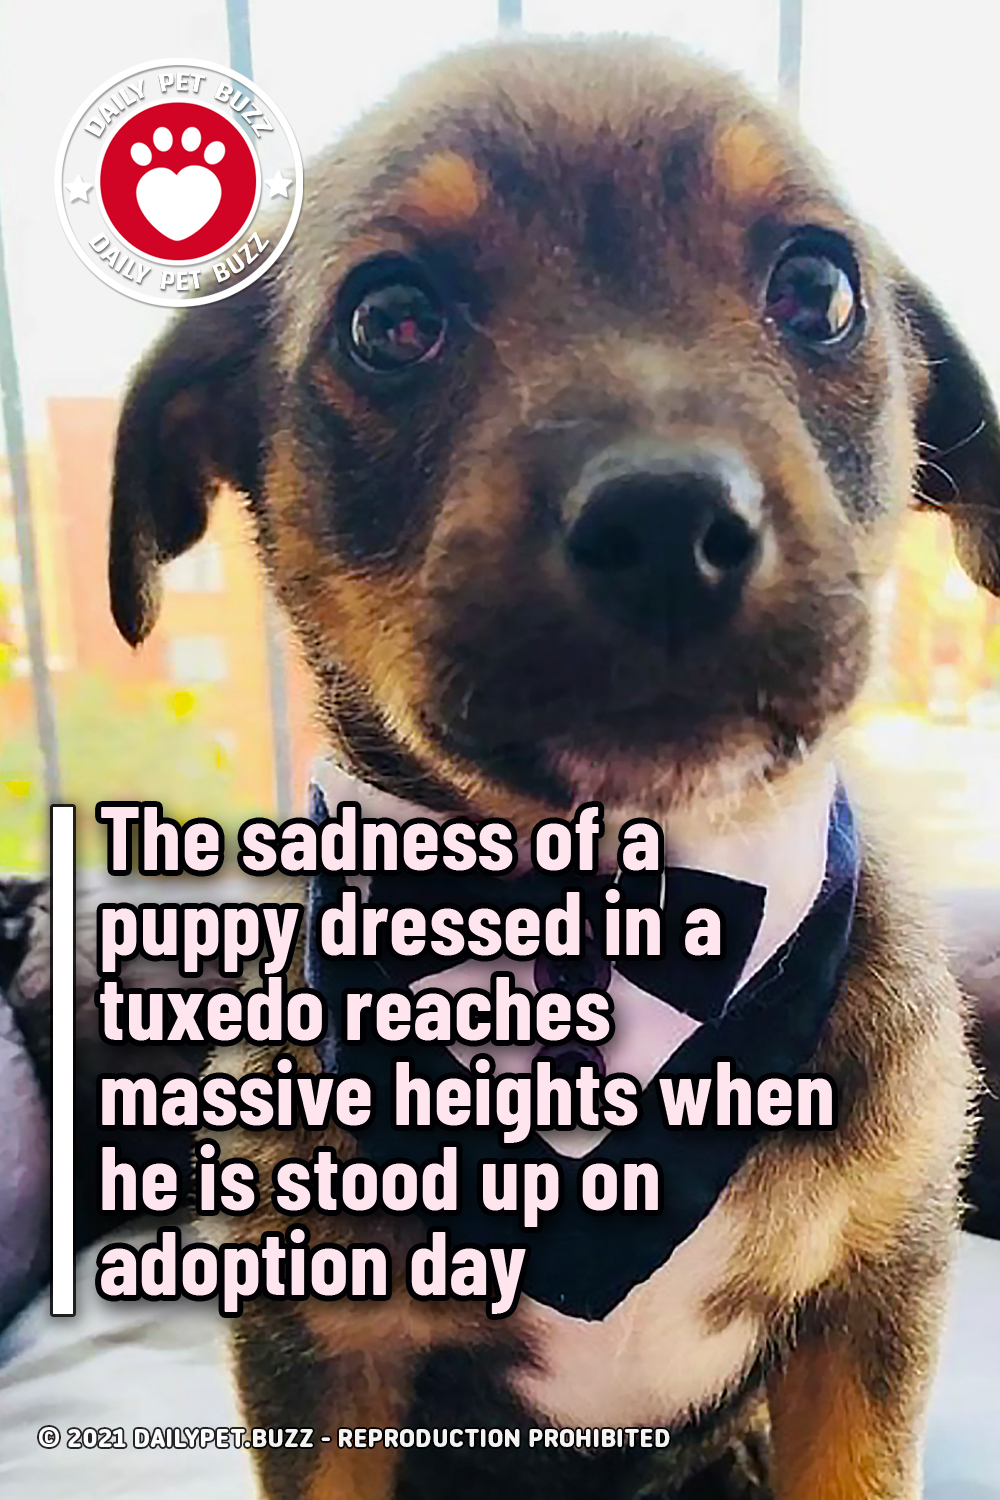 The sadness of a puppy dressed in a tuxedo reaches massive heights when he is stood up on adoption day